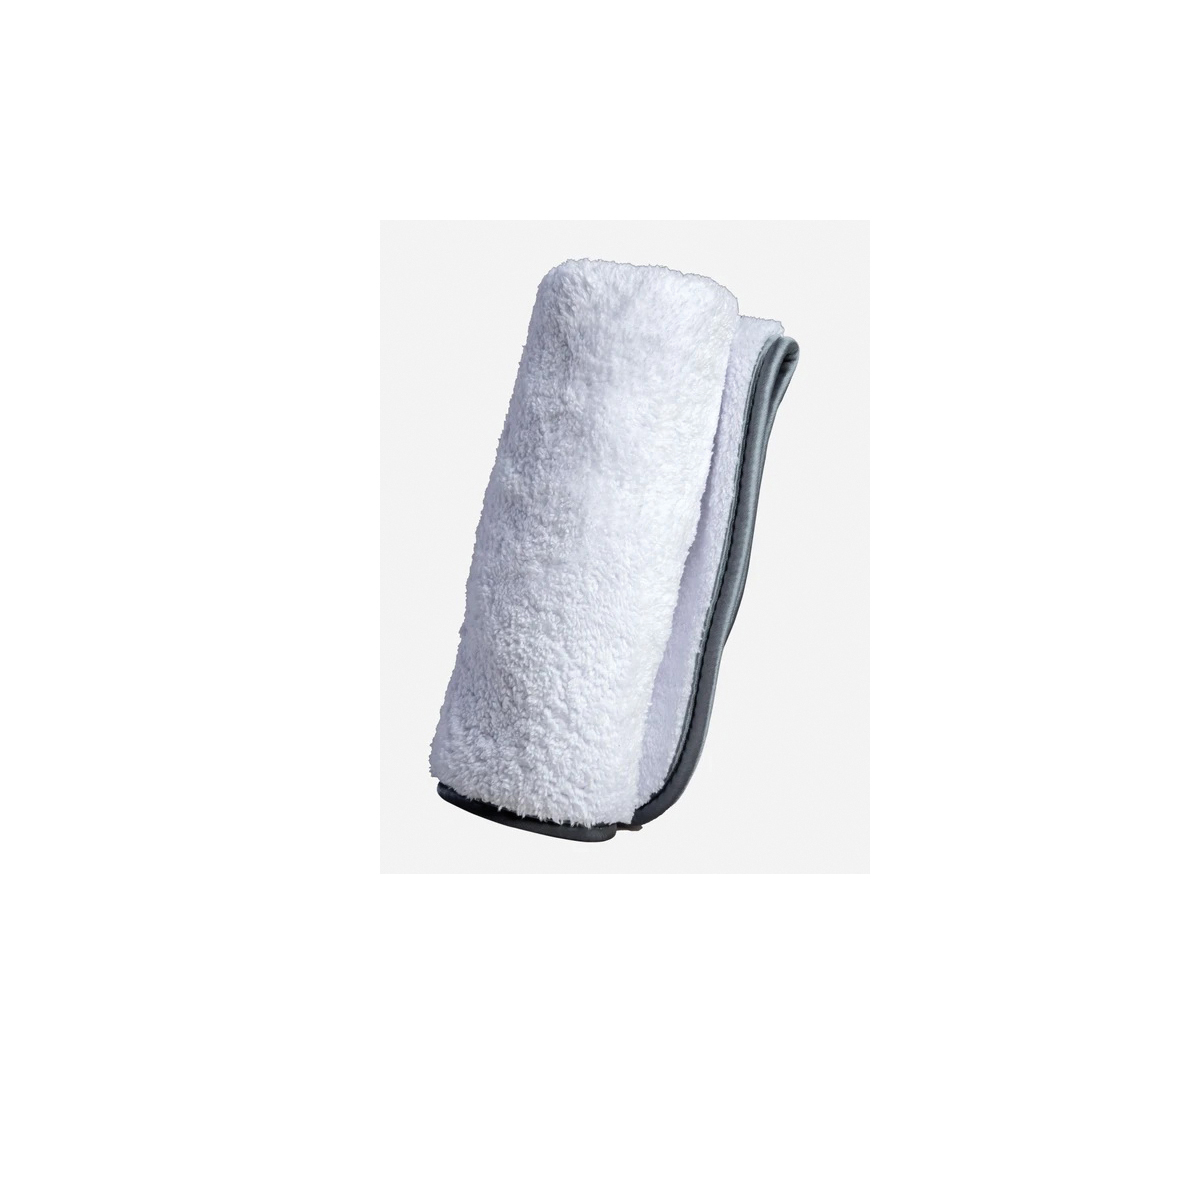 ADAM'S POLISHES WS-MF-DST-6 Double Soft Towel, Microfiber, White - 2